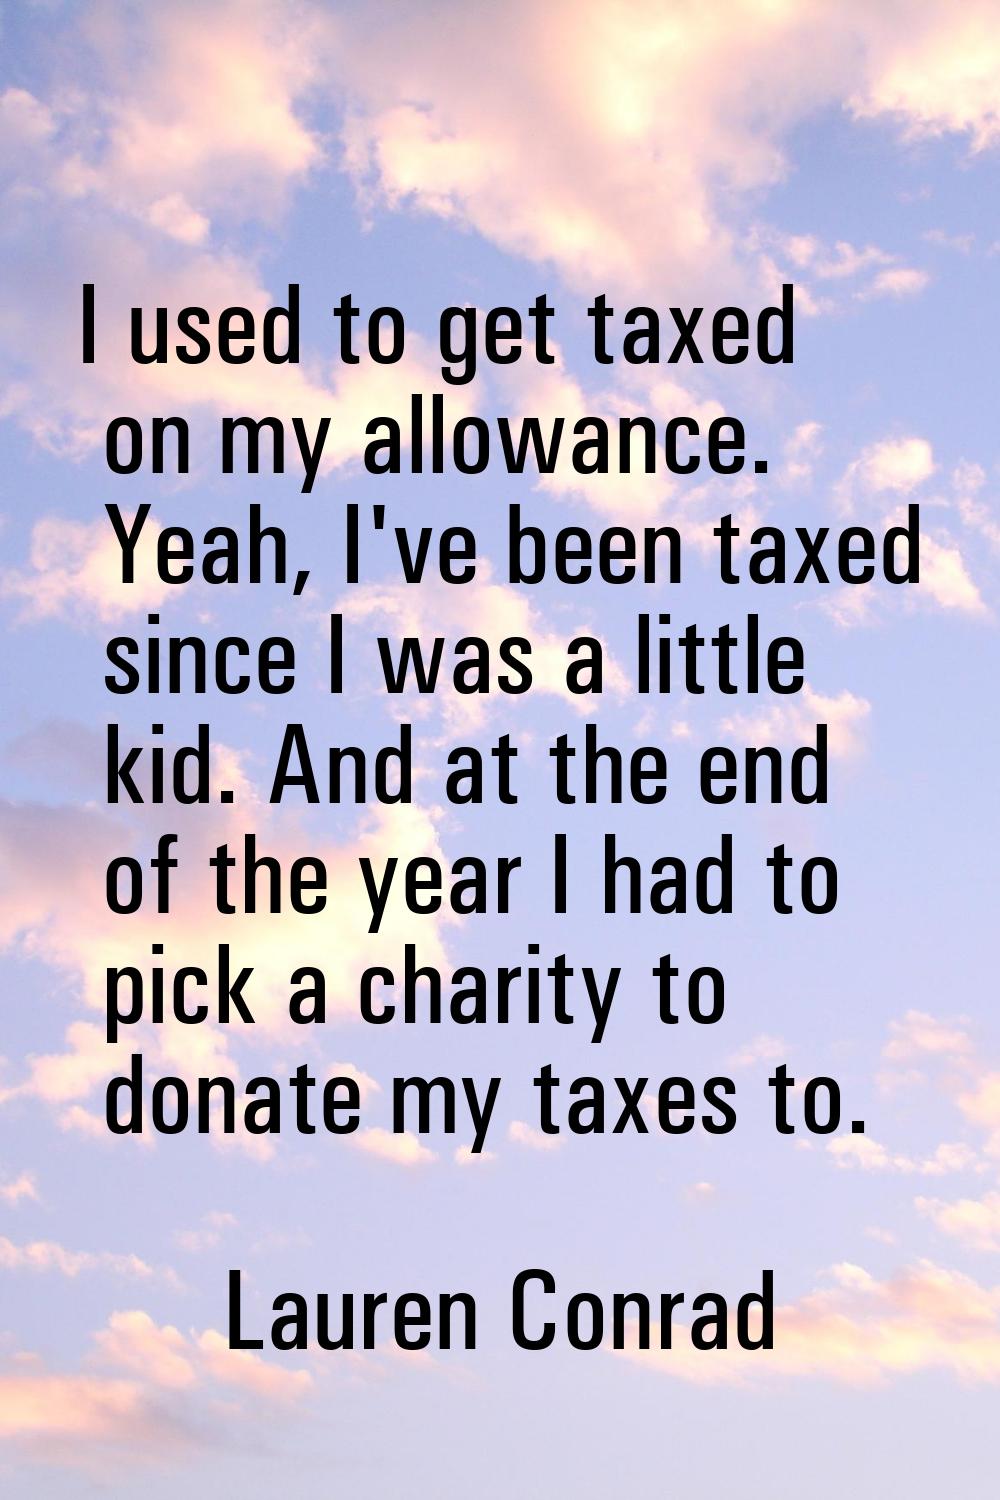 I used to get taxed on my allowance. Yeah, I've been taxed since I was a little kid. And at the end